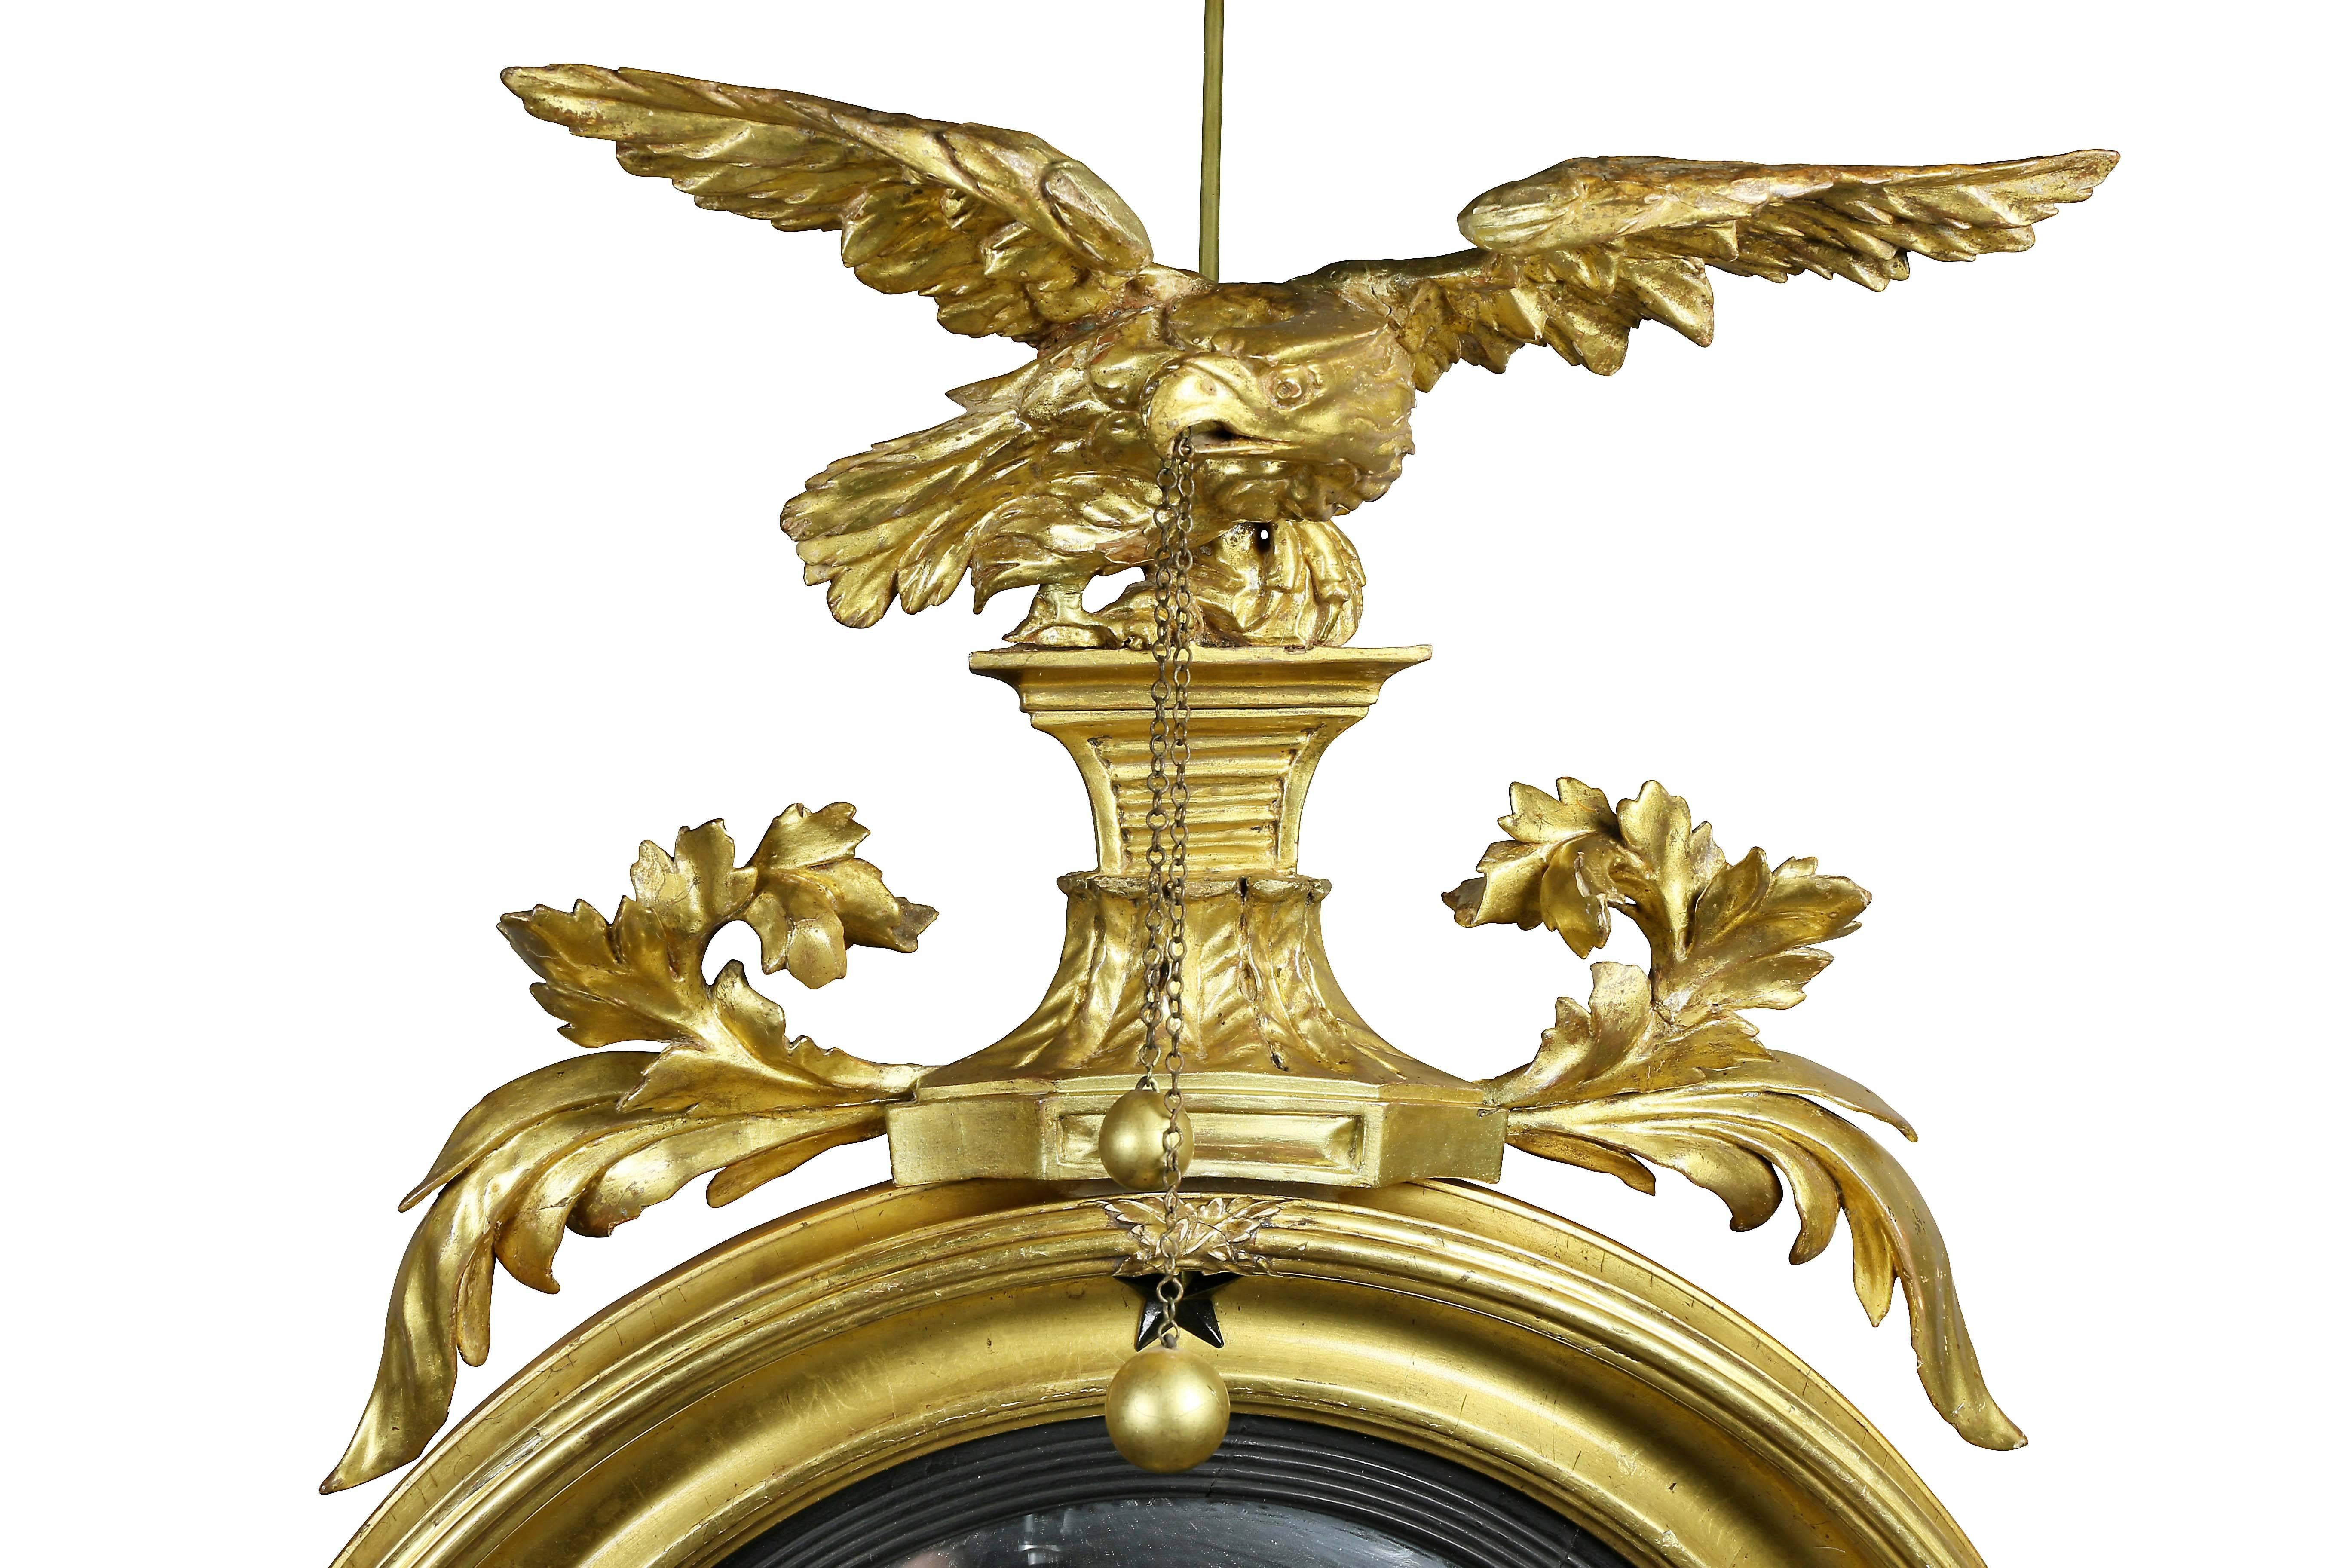 With eagle surmount over a convex plate and ebonized outer ring, the cove molded frame with Ebonized stars, two candle arms formed as finely detailed serpents.